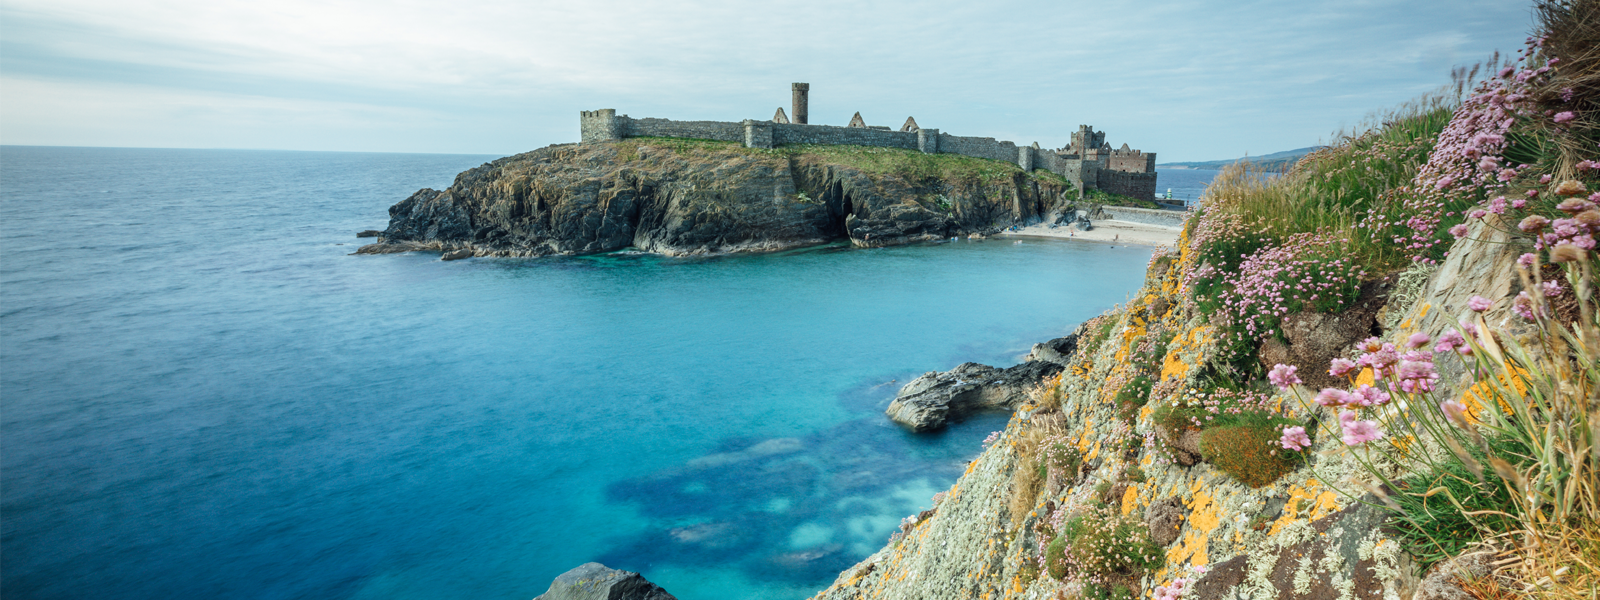 Peel Castle sitting proudly on St Patrick's Isle in Peel, Isle of Man. The image is taken from the adjacent coastline, just south of the castle. It shows the castle and St Patrick's Isle surrounded by the sparkling blue Irish Sea.